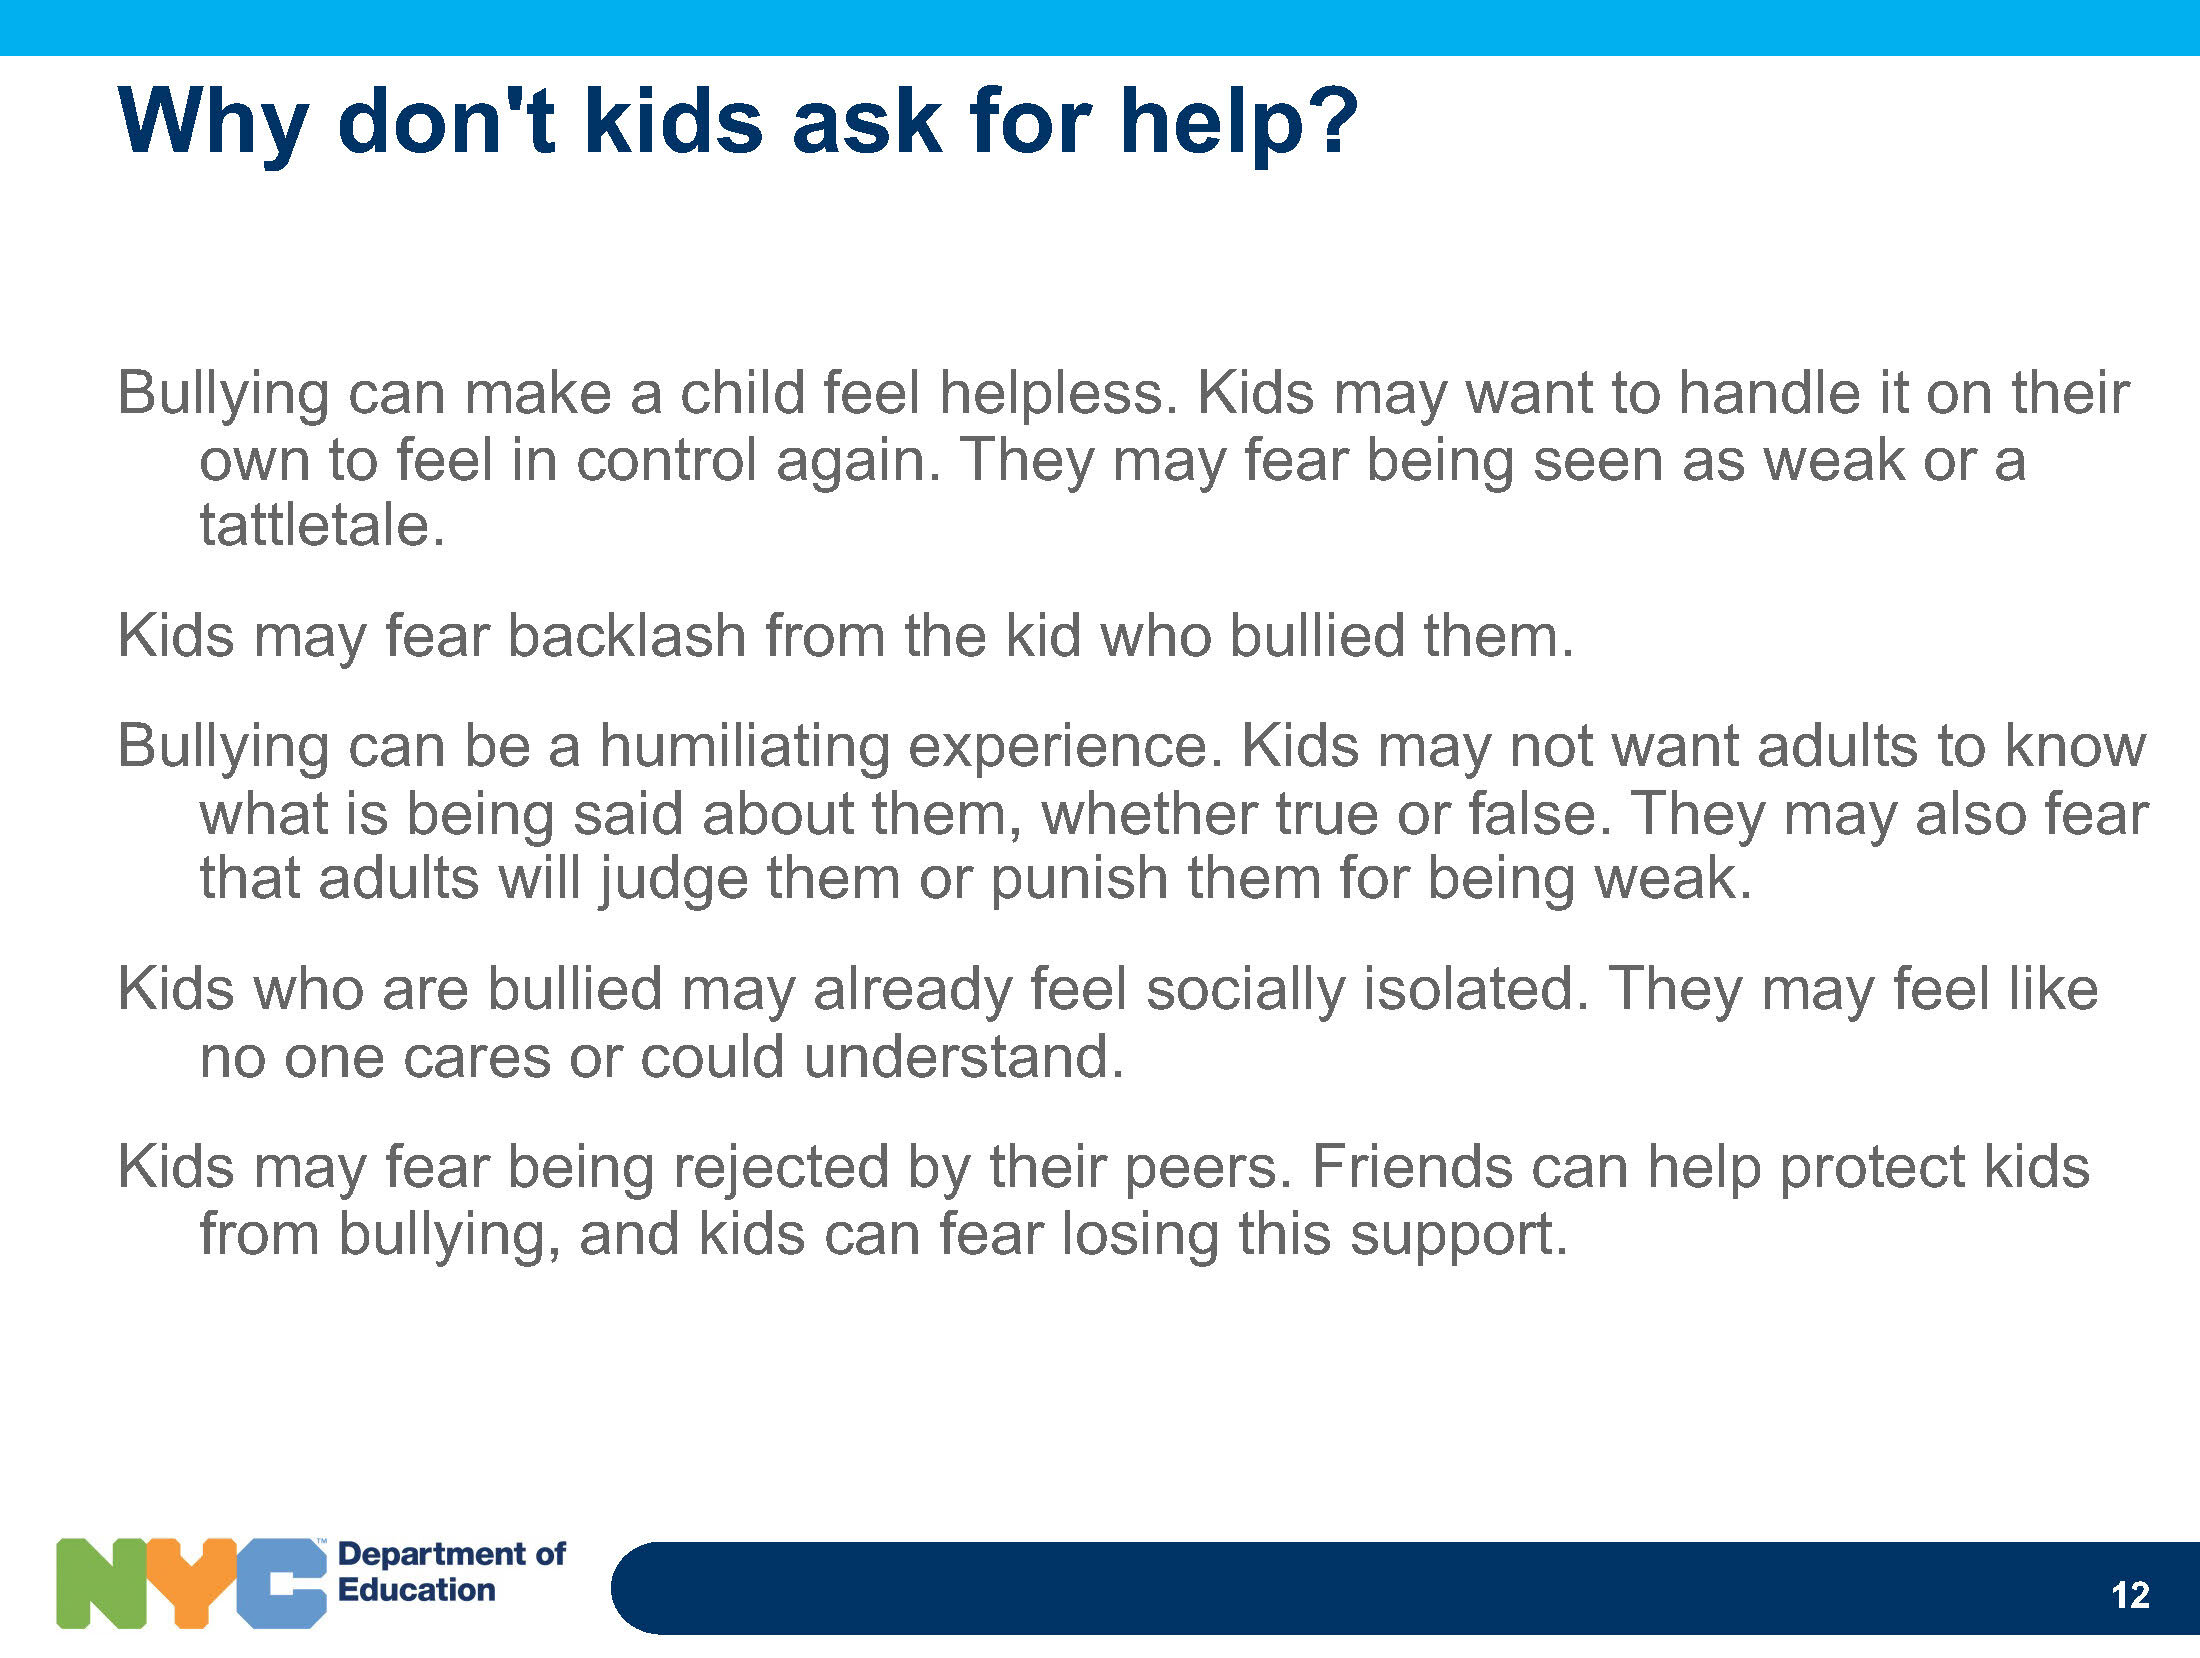 face-bullying-and-cyberbullying-presentation-for-parents_Page_12.jpg